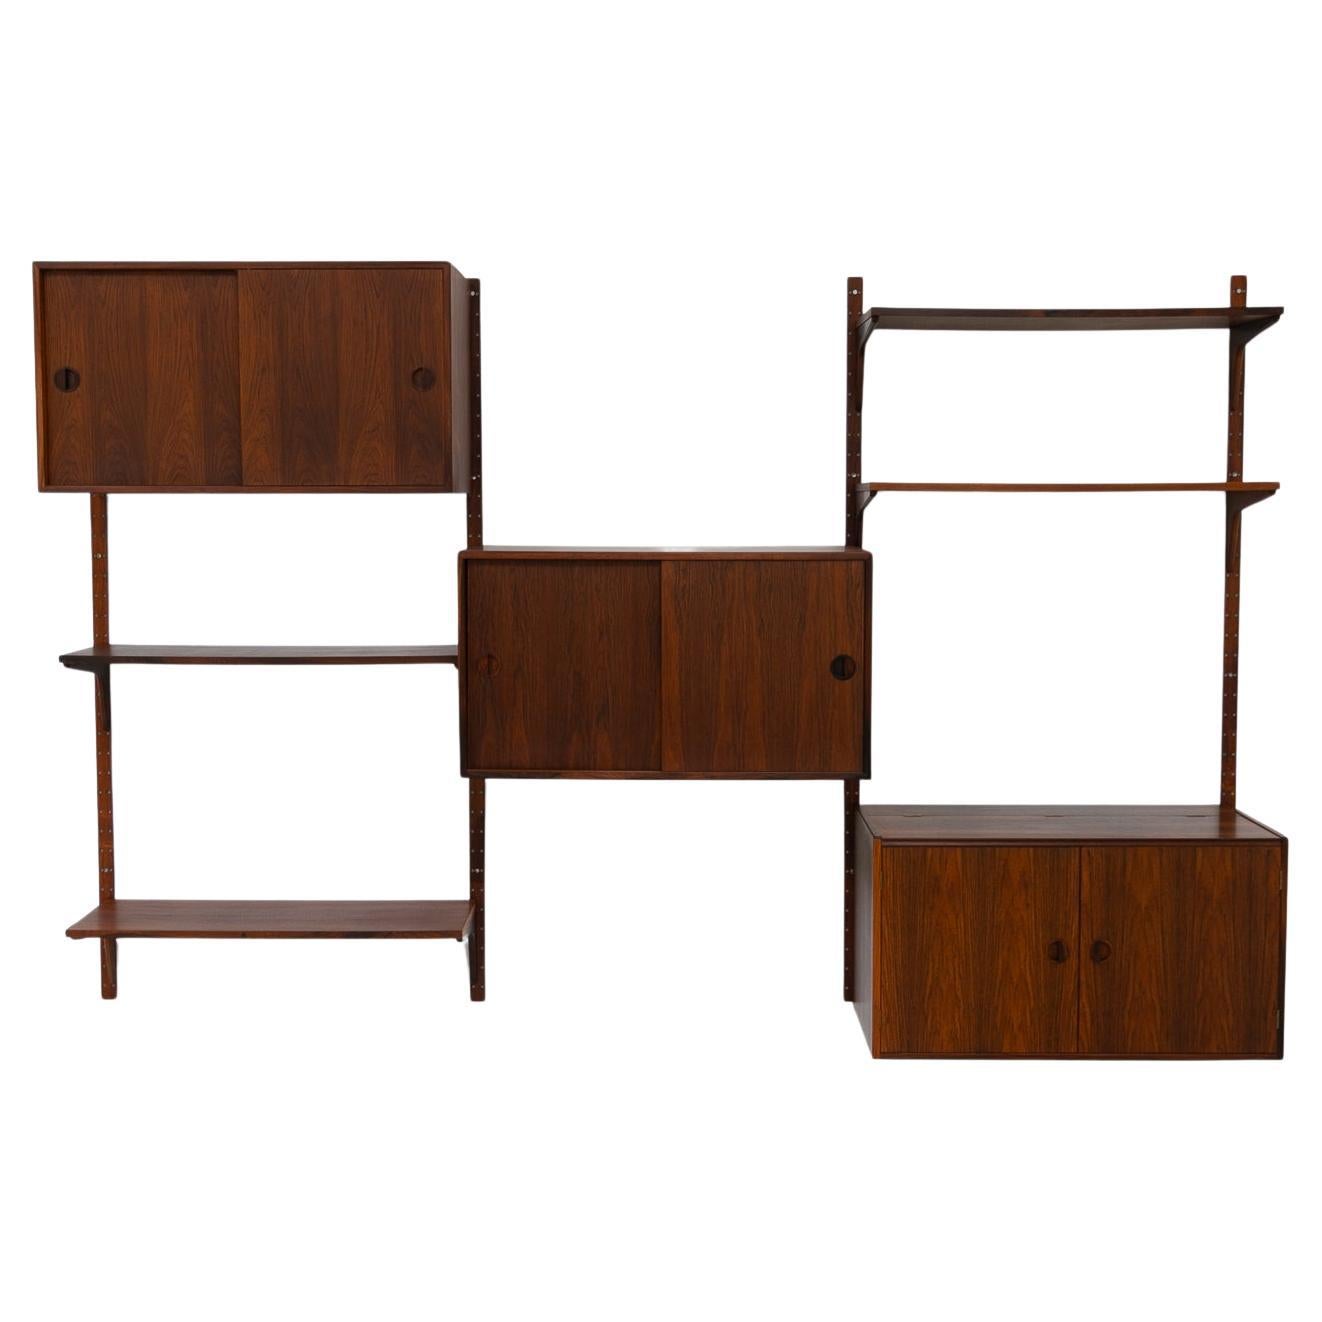 Vintage Danish Rosewood Modular Wall Unit by HG Furniture, 1960s.